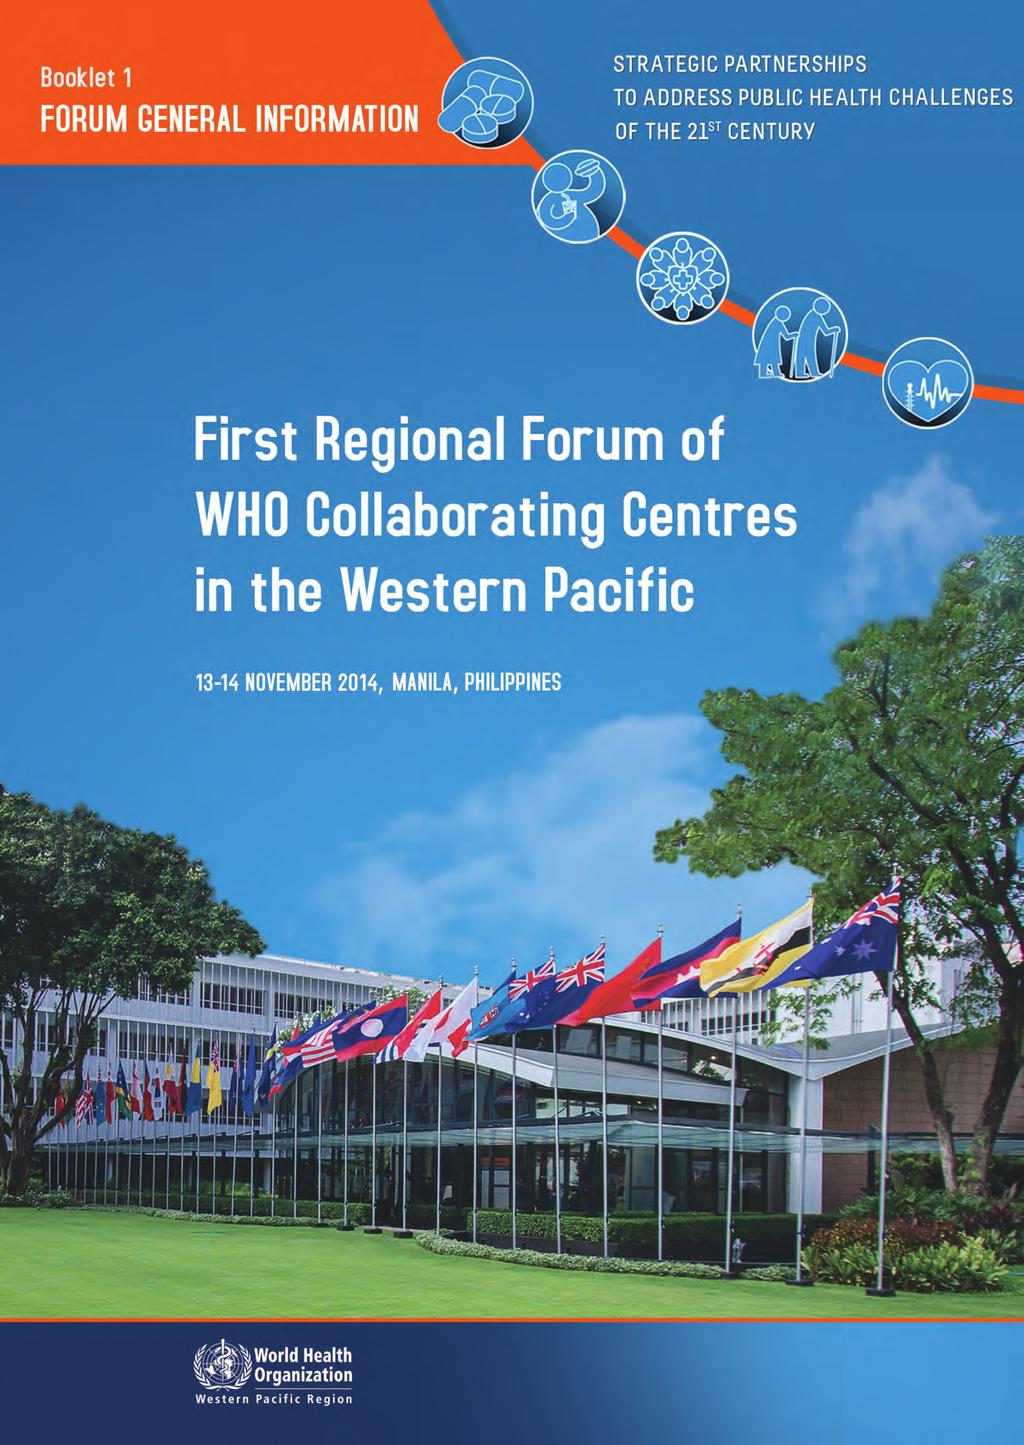 FIRST REGIONAL FORUM OF WHO